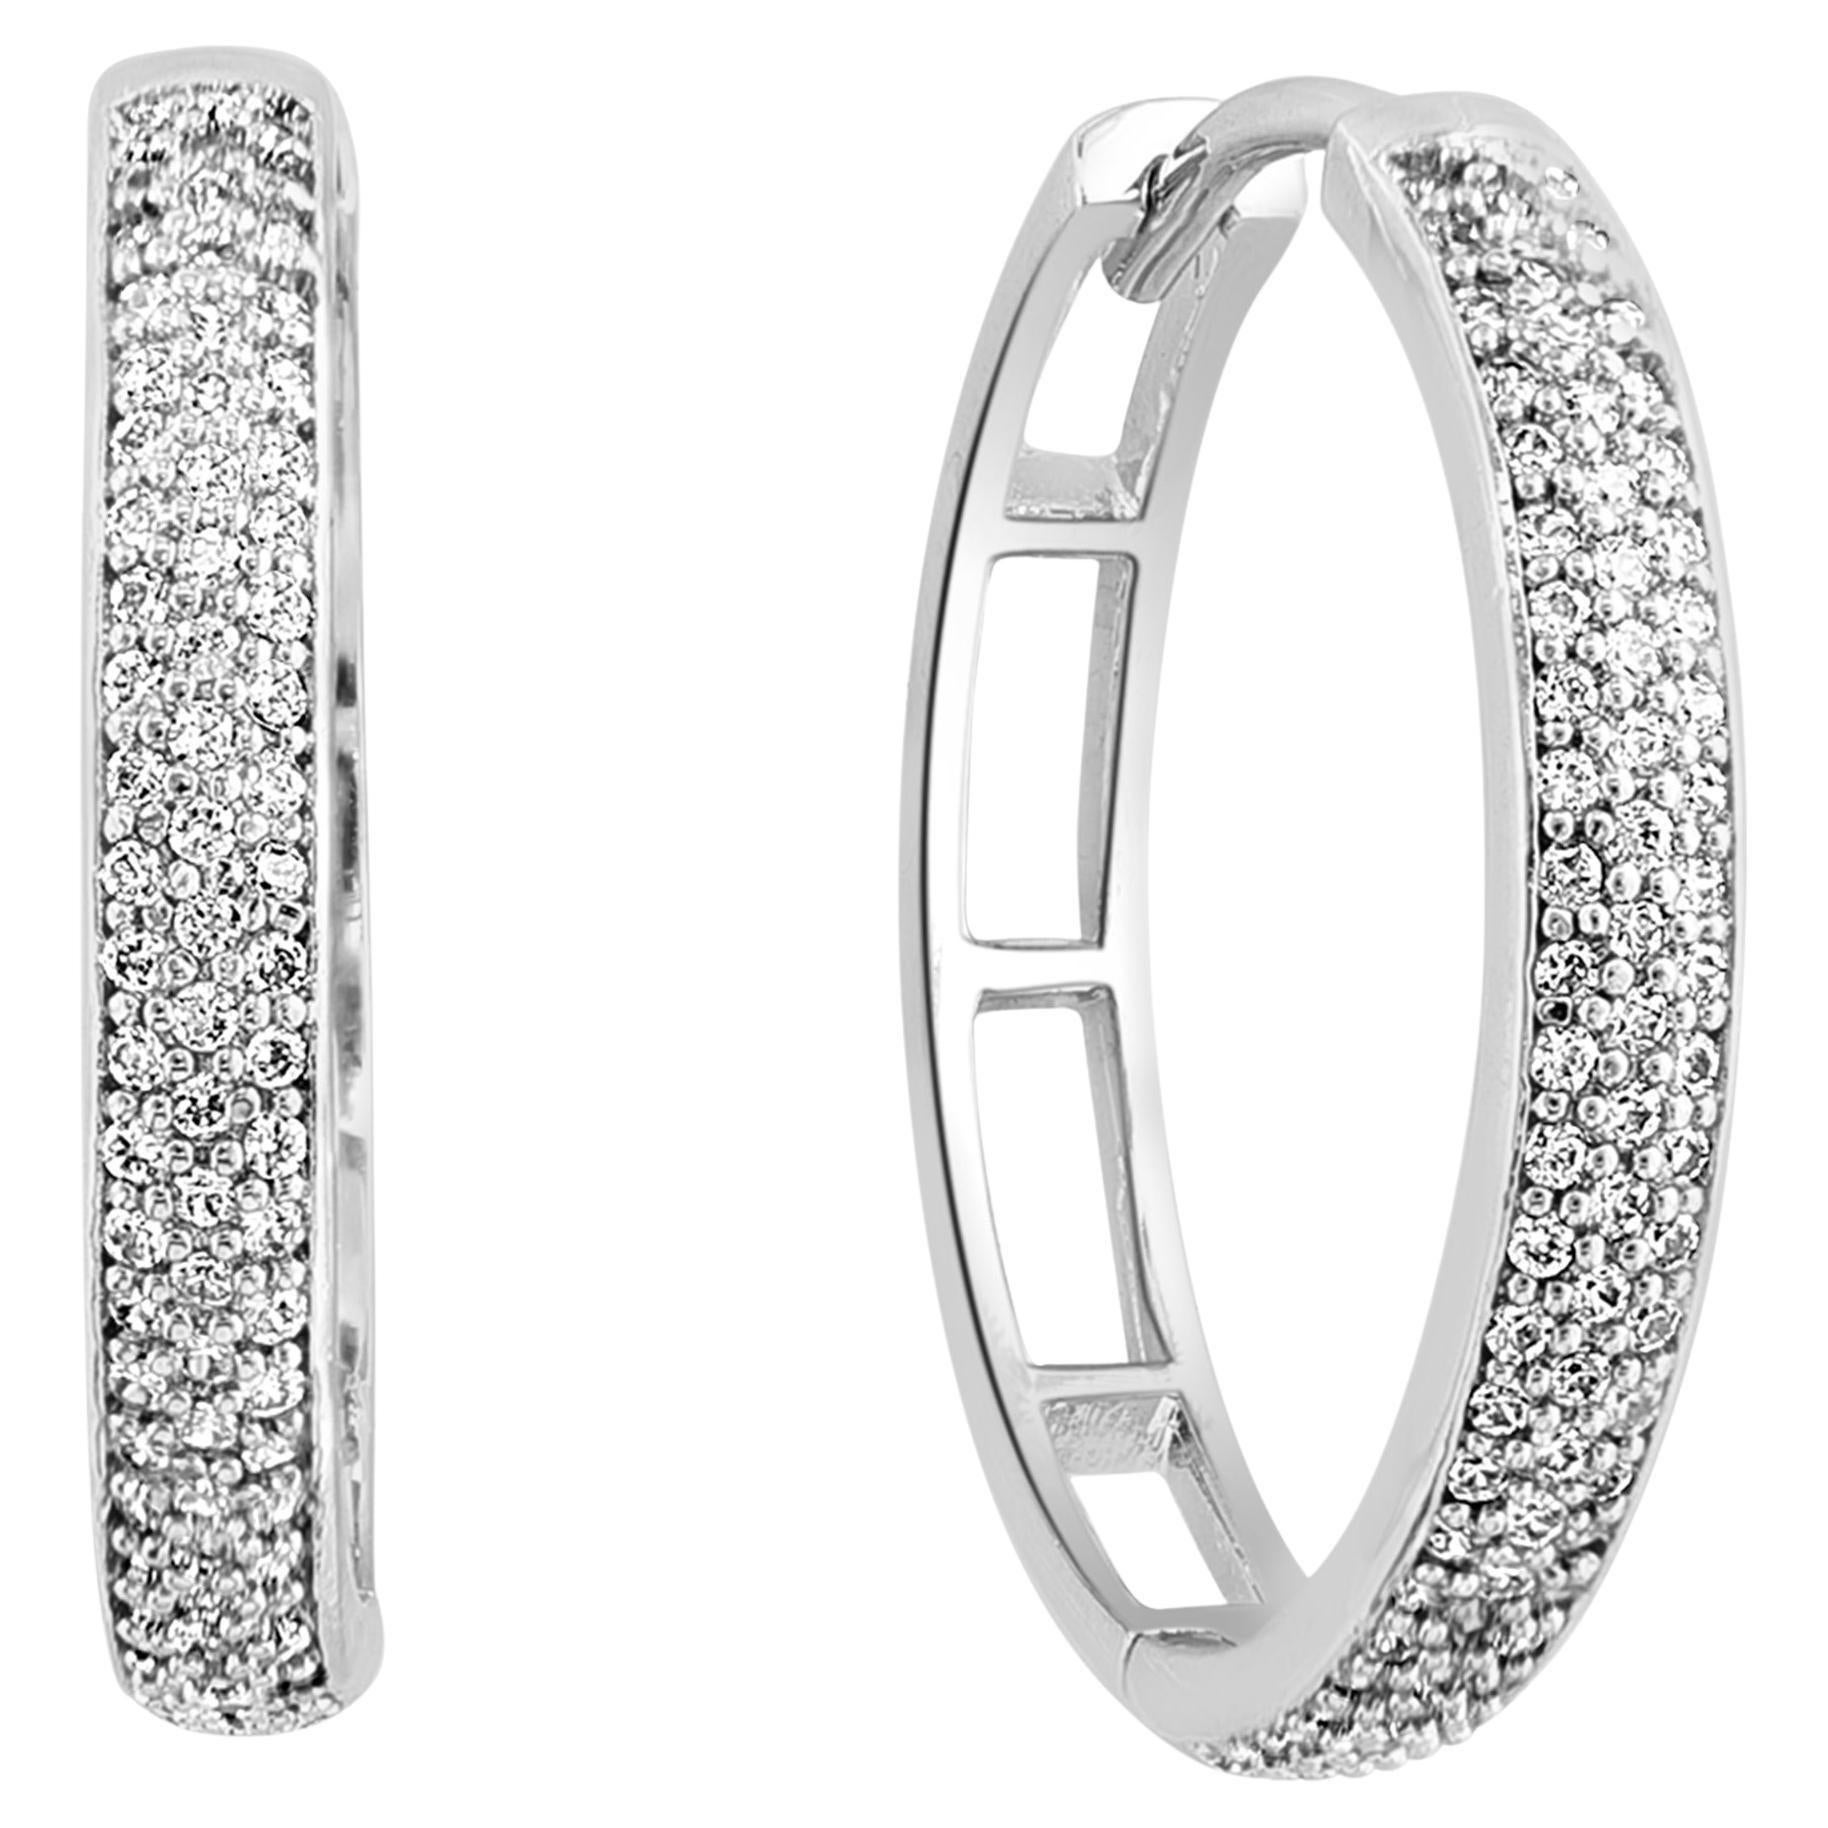 Hot Fashionable Small  1.0 Inch  Sterling Silver & Cubic Zirconia Hoop Earrings 1